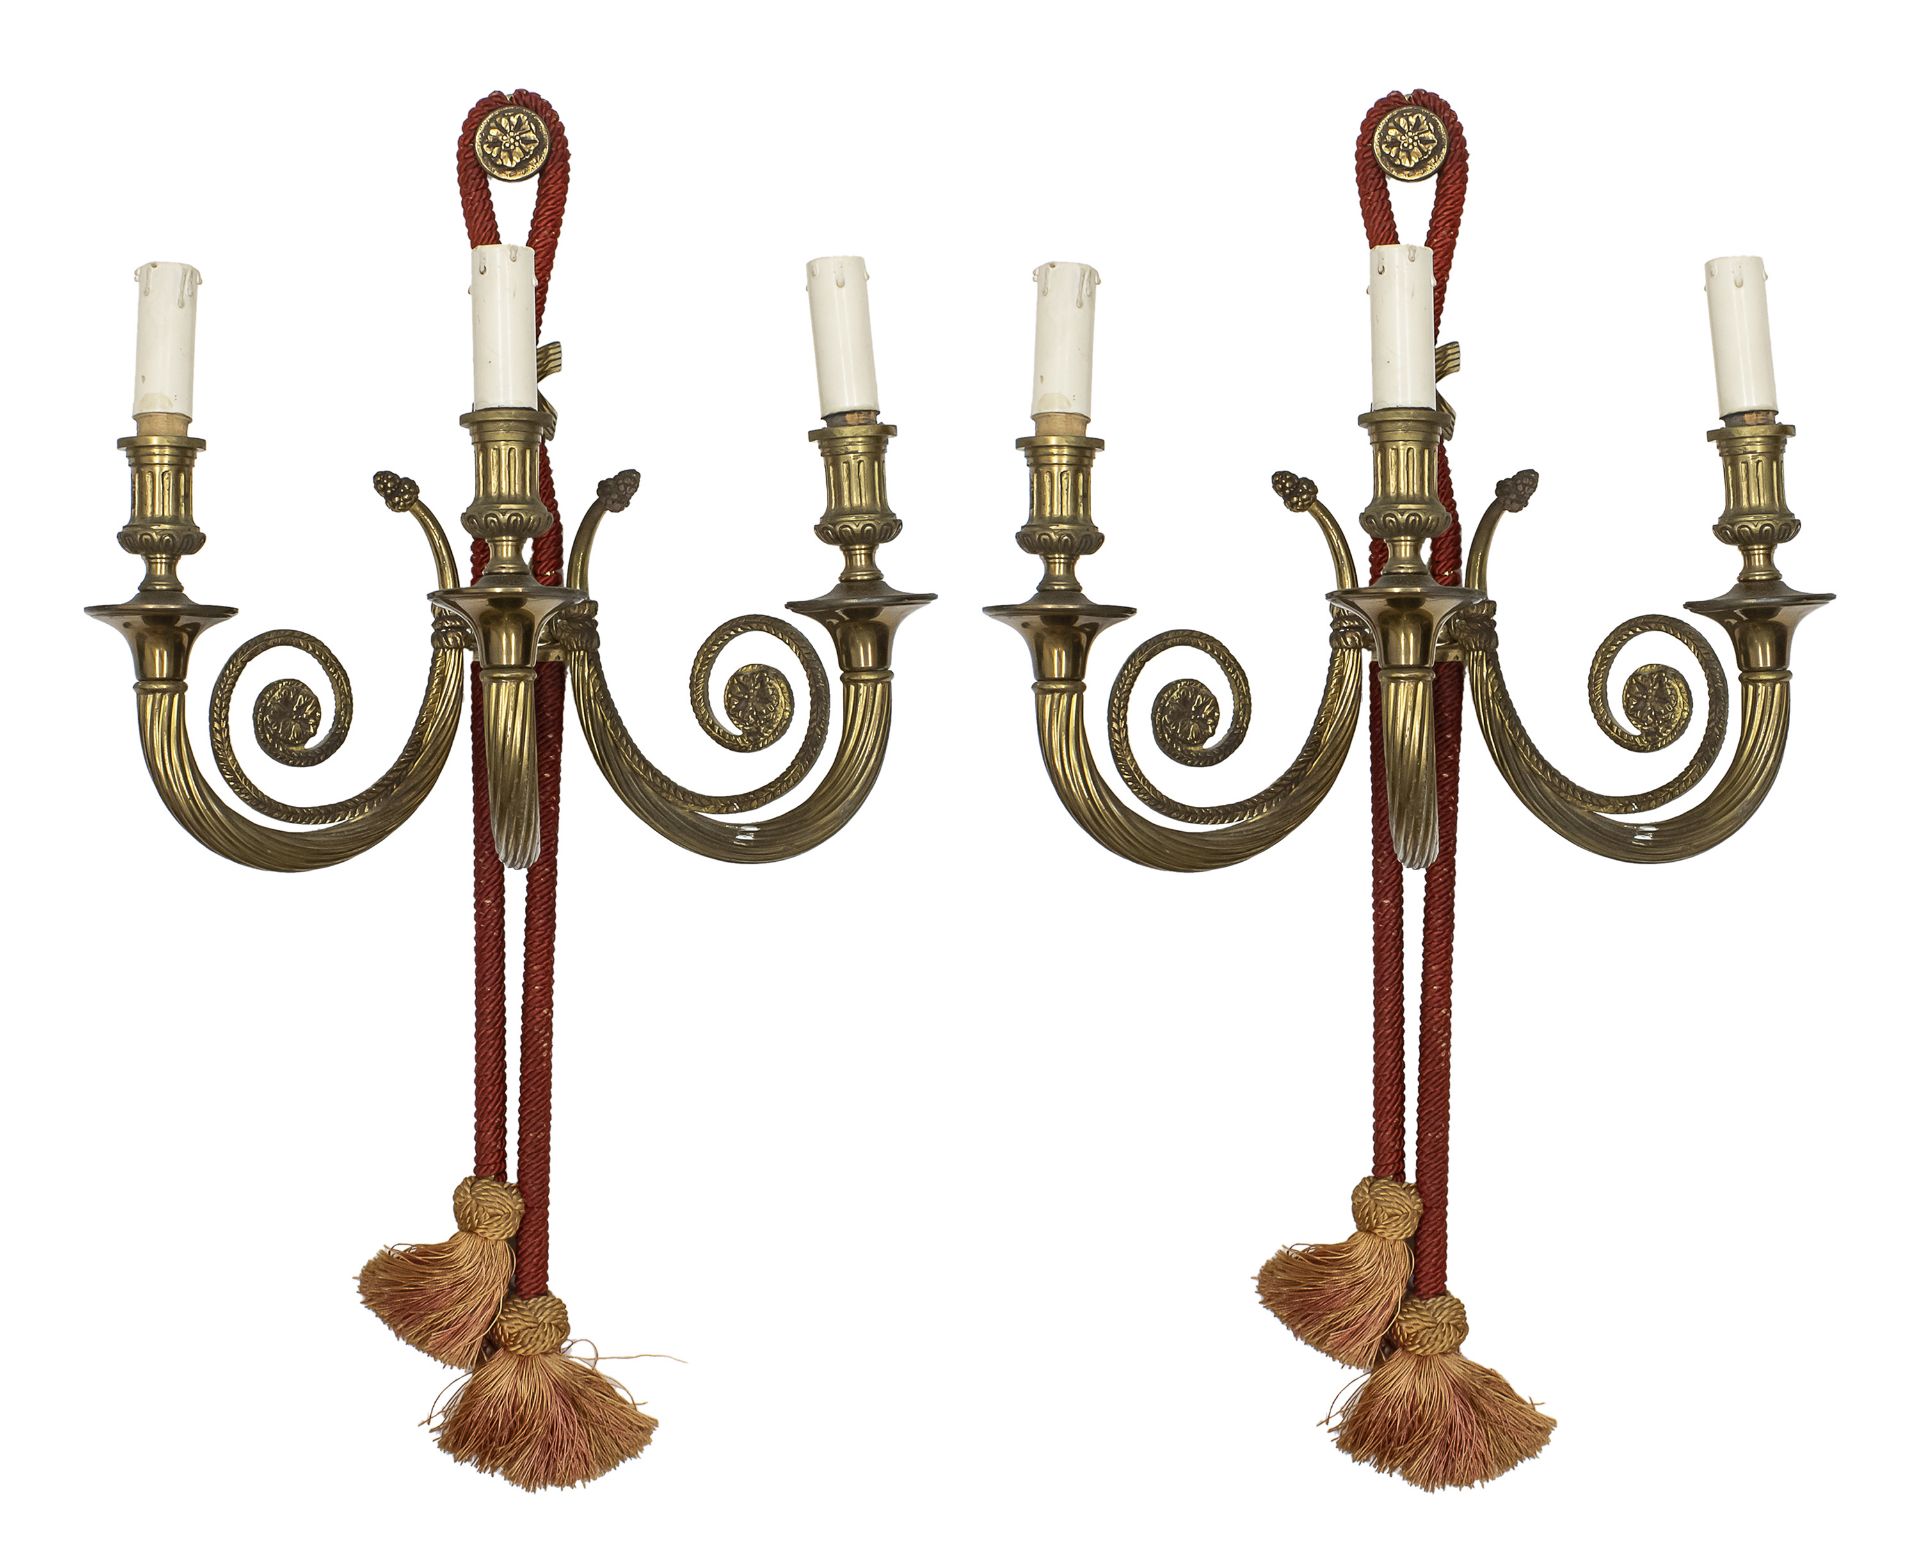 PAIR OF GILT BRONZE WALL LAMPS, EARLY 20TH CENTURY